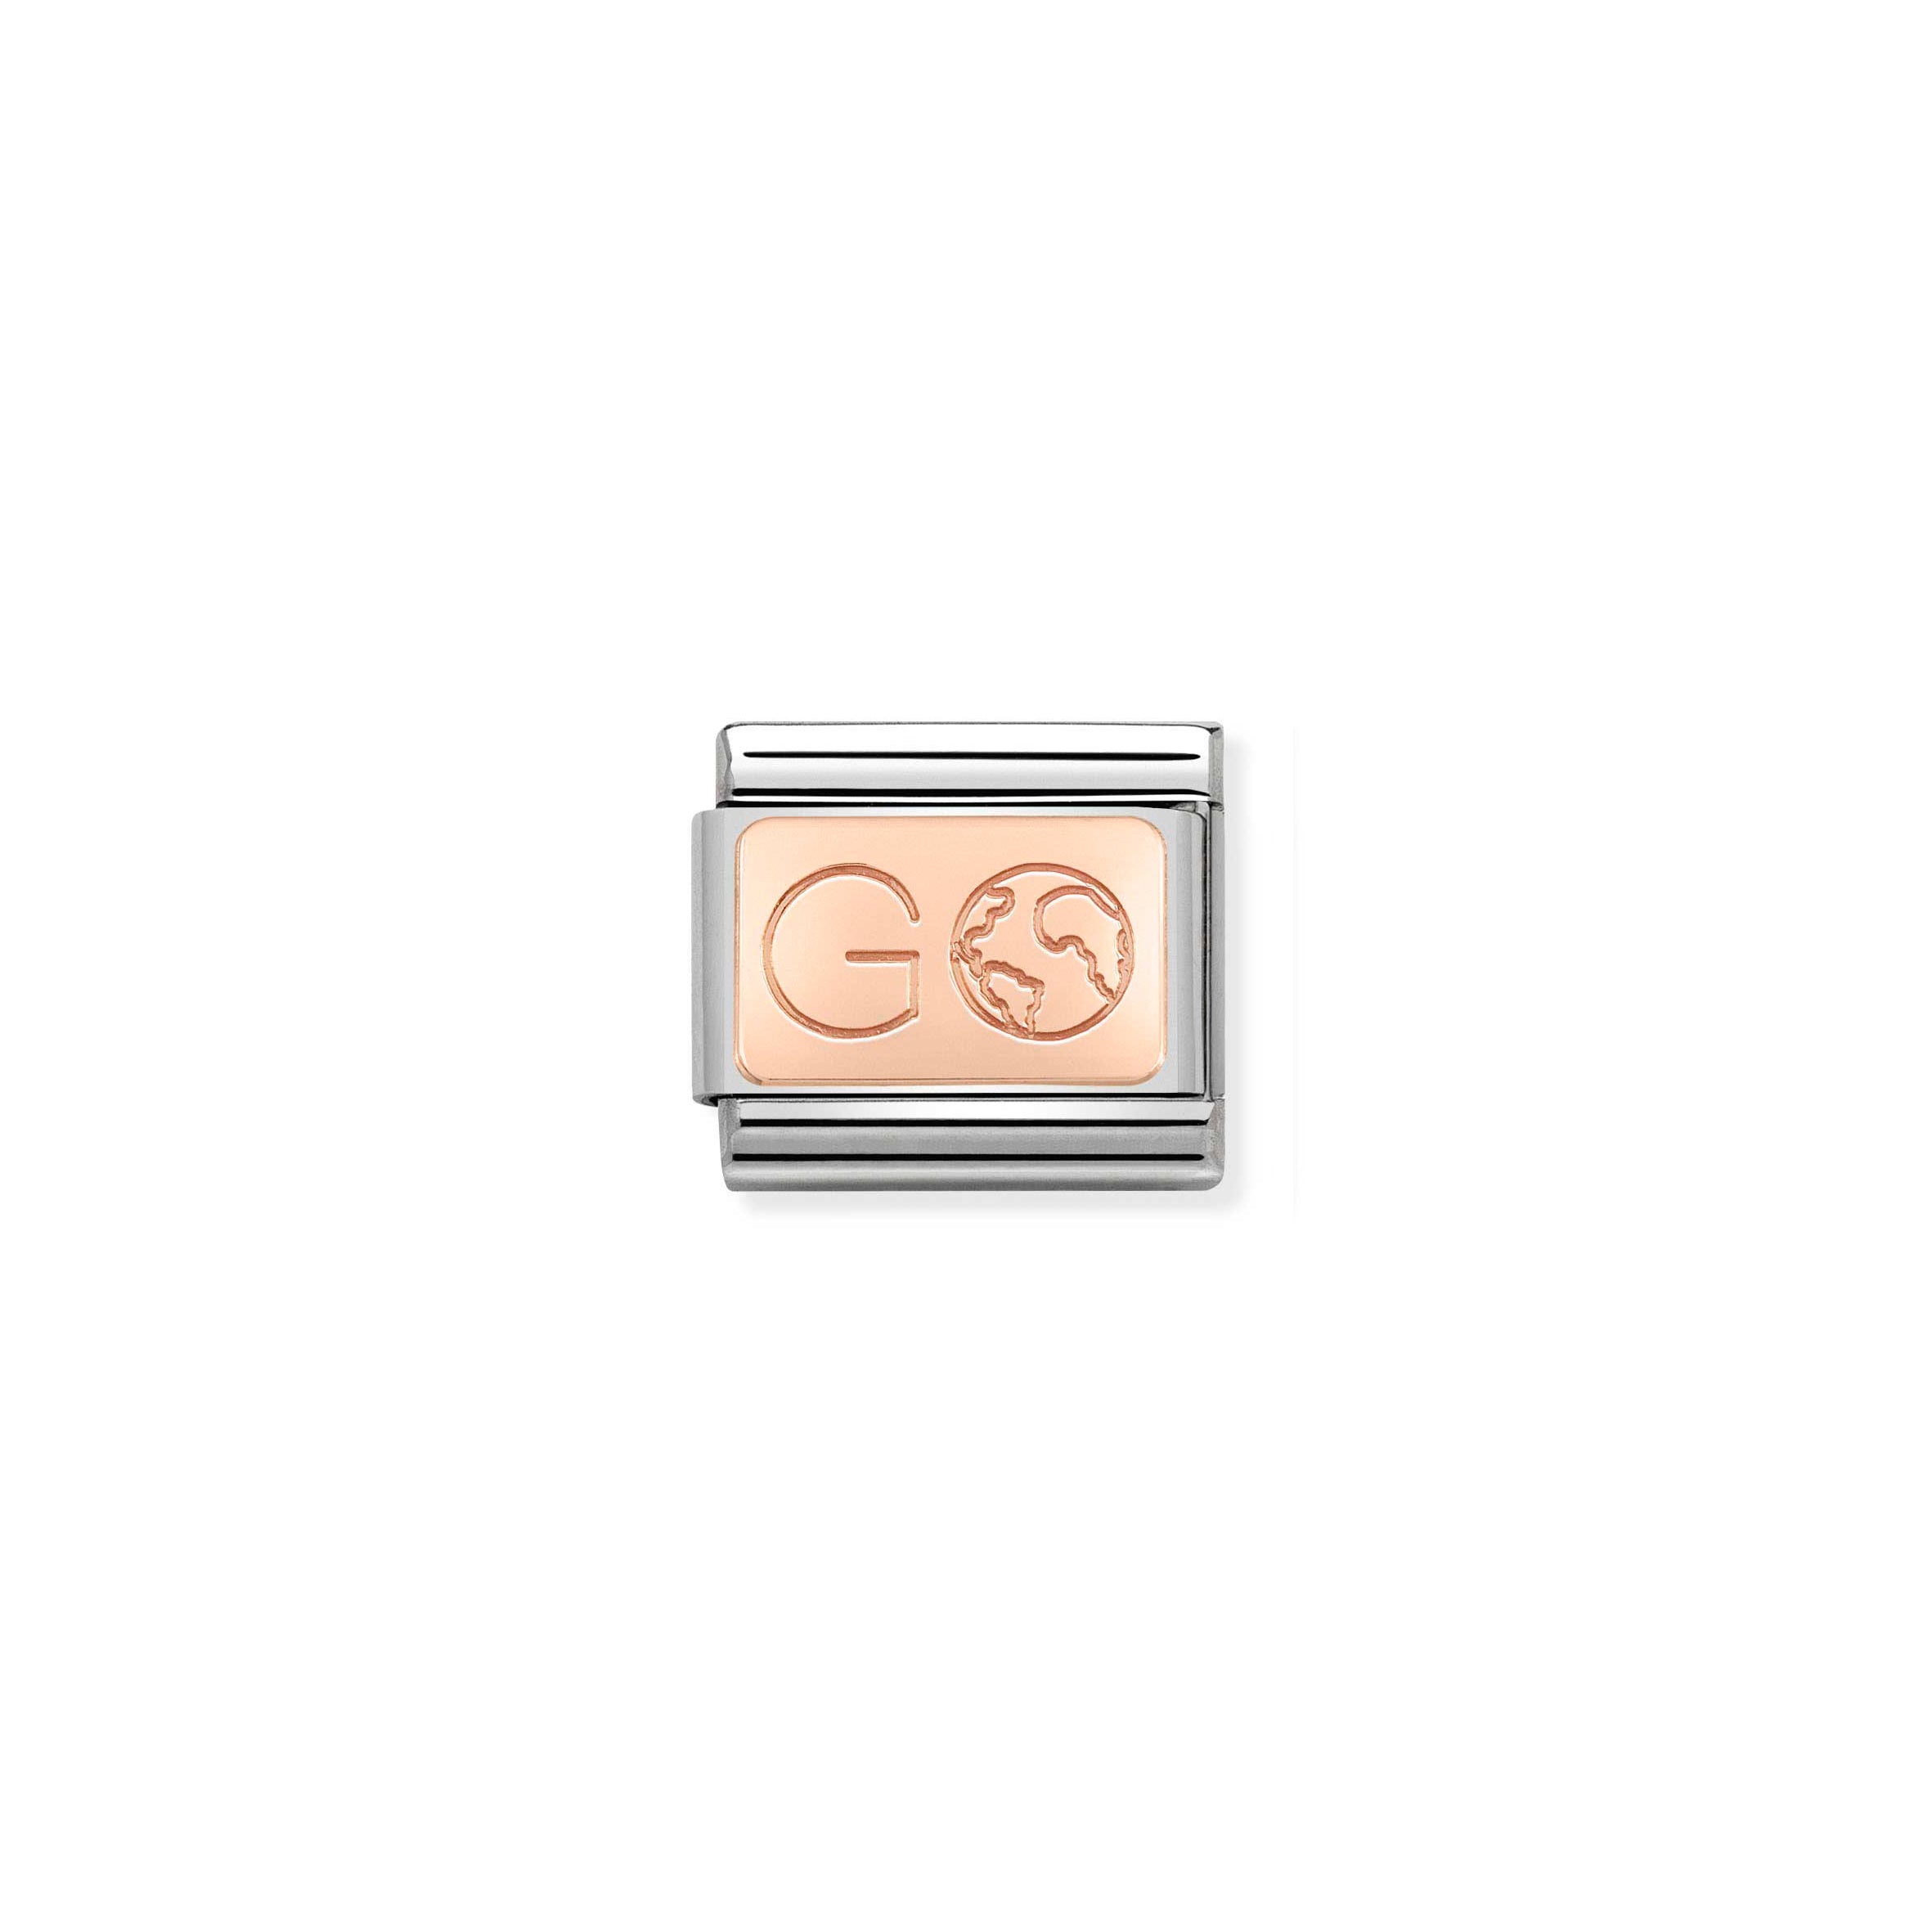 NOMINATION - Composable Classic SYMBOLS PLATE 1  st/steel & 9ct rose gold (GO)